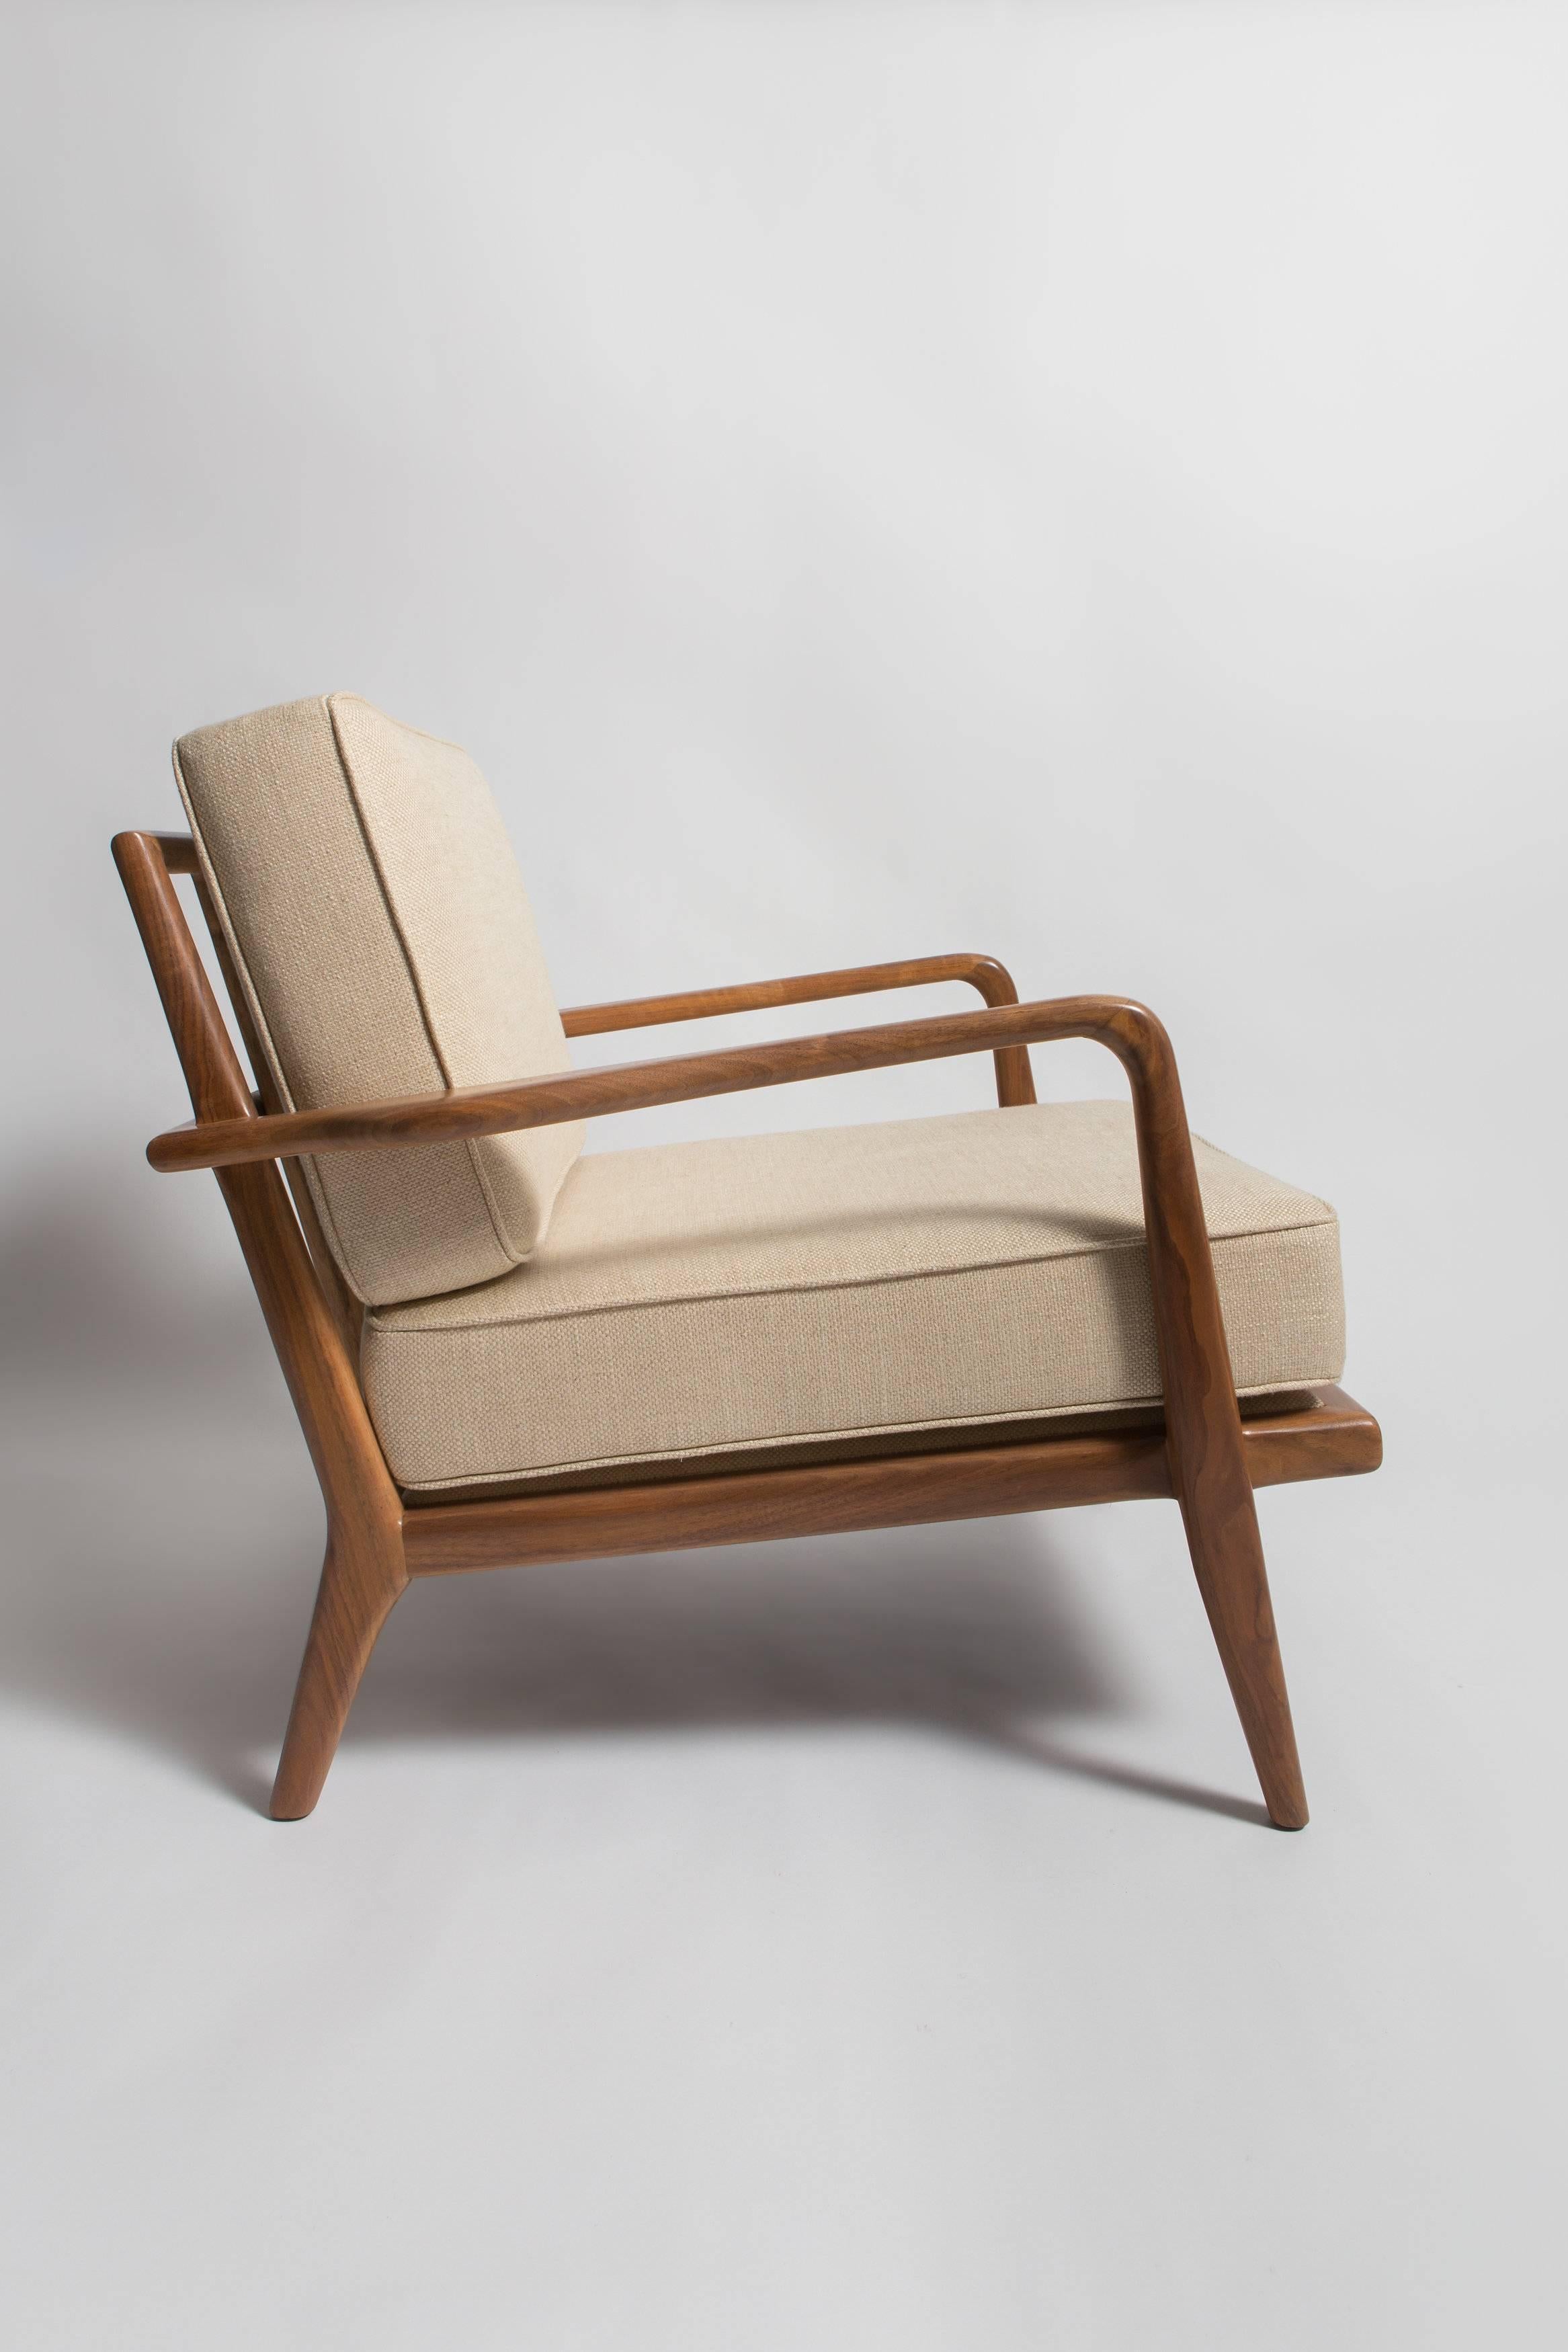 Vintage, 1950s, solid walnut Smilow railback lounge chair. Reupholstered in cream linen.
 